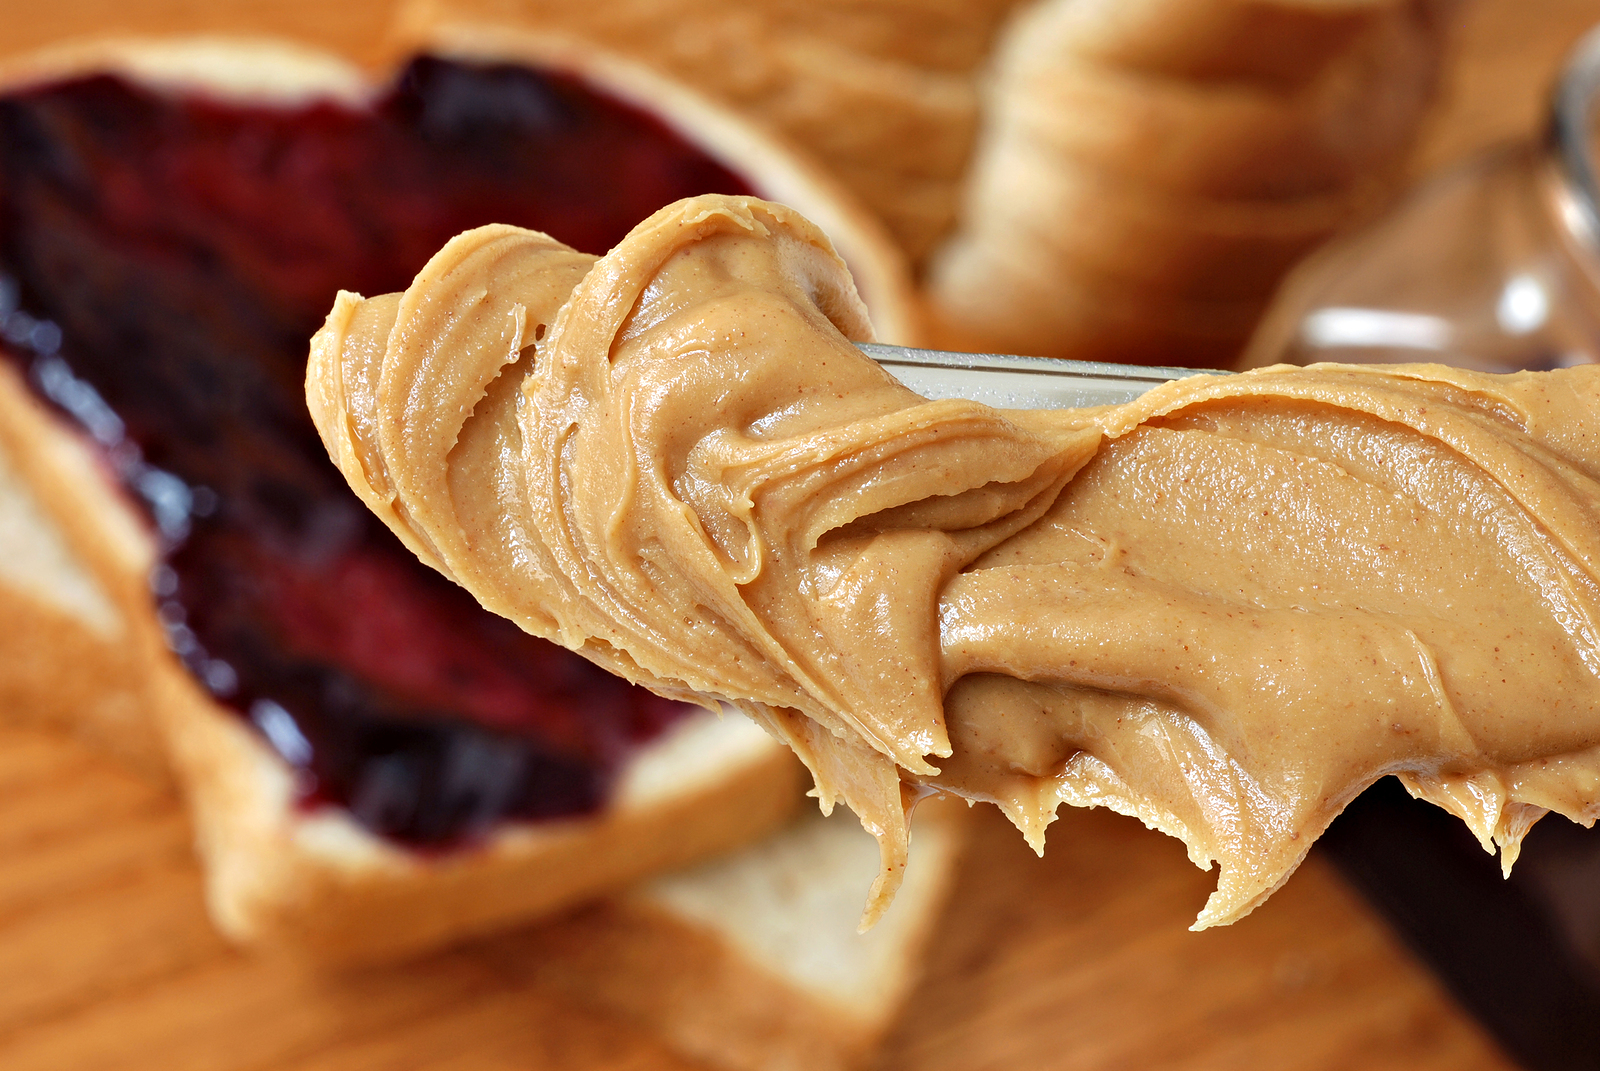 Peanut butter on a butter knife above a slice of bread with jam.